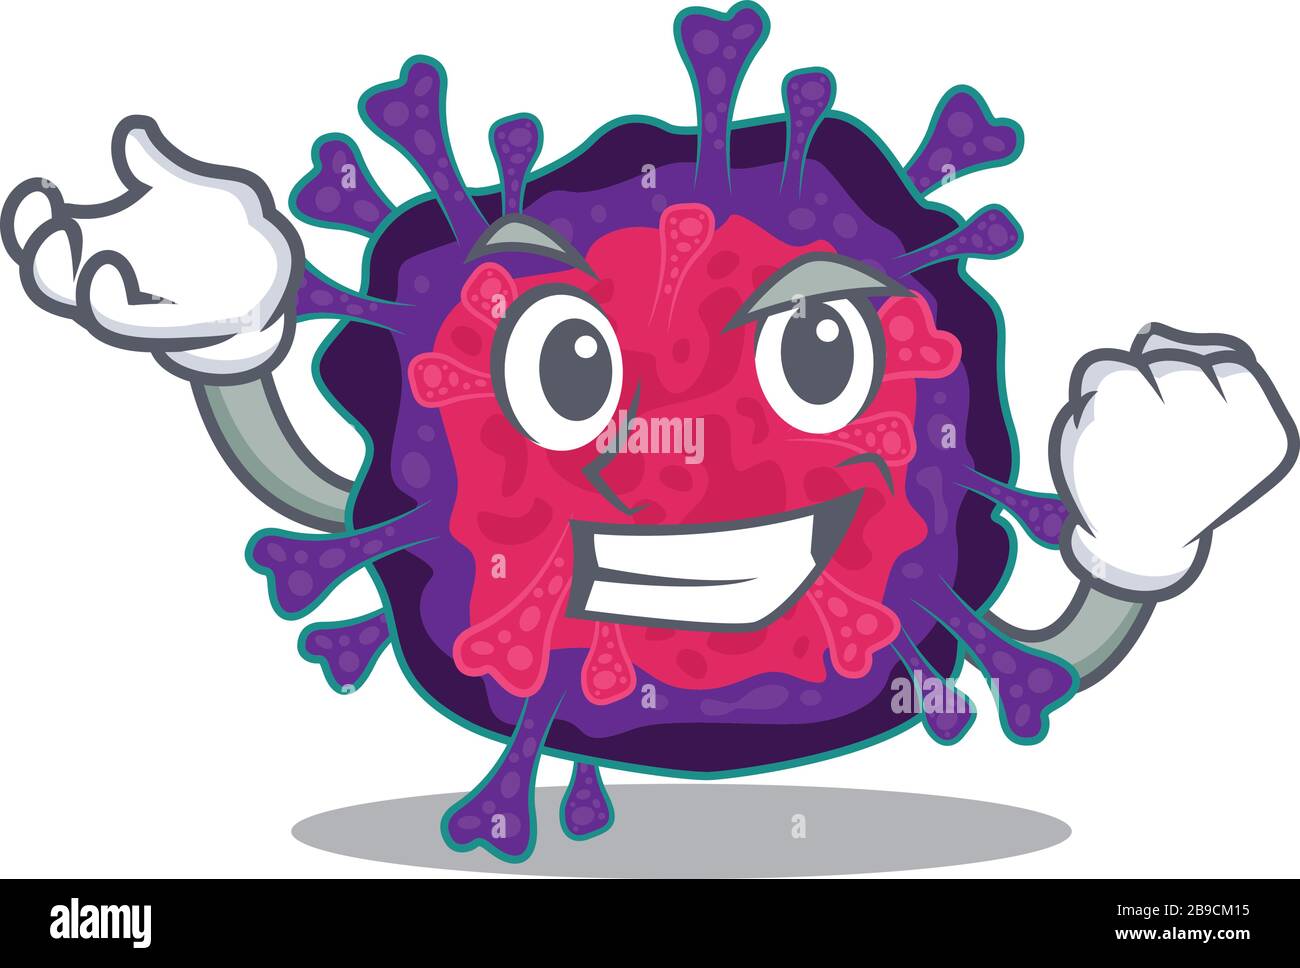 Nyctacovirus cartoon character style with happy face Stock Vector